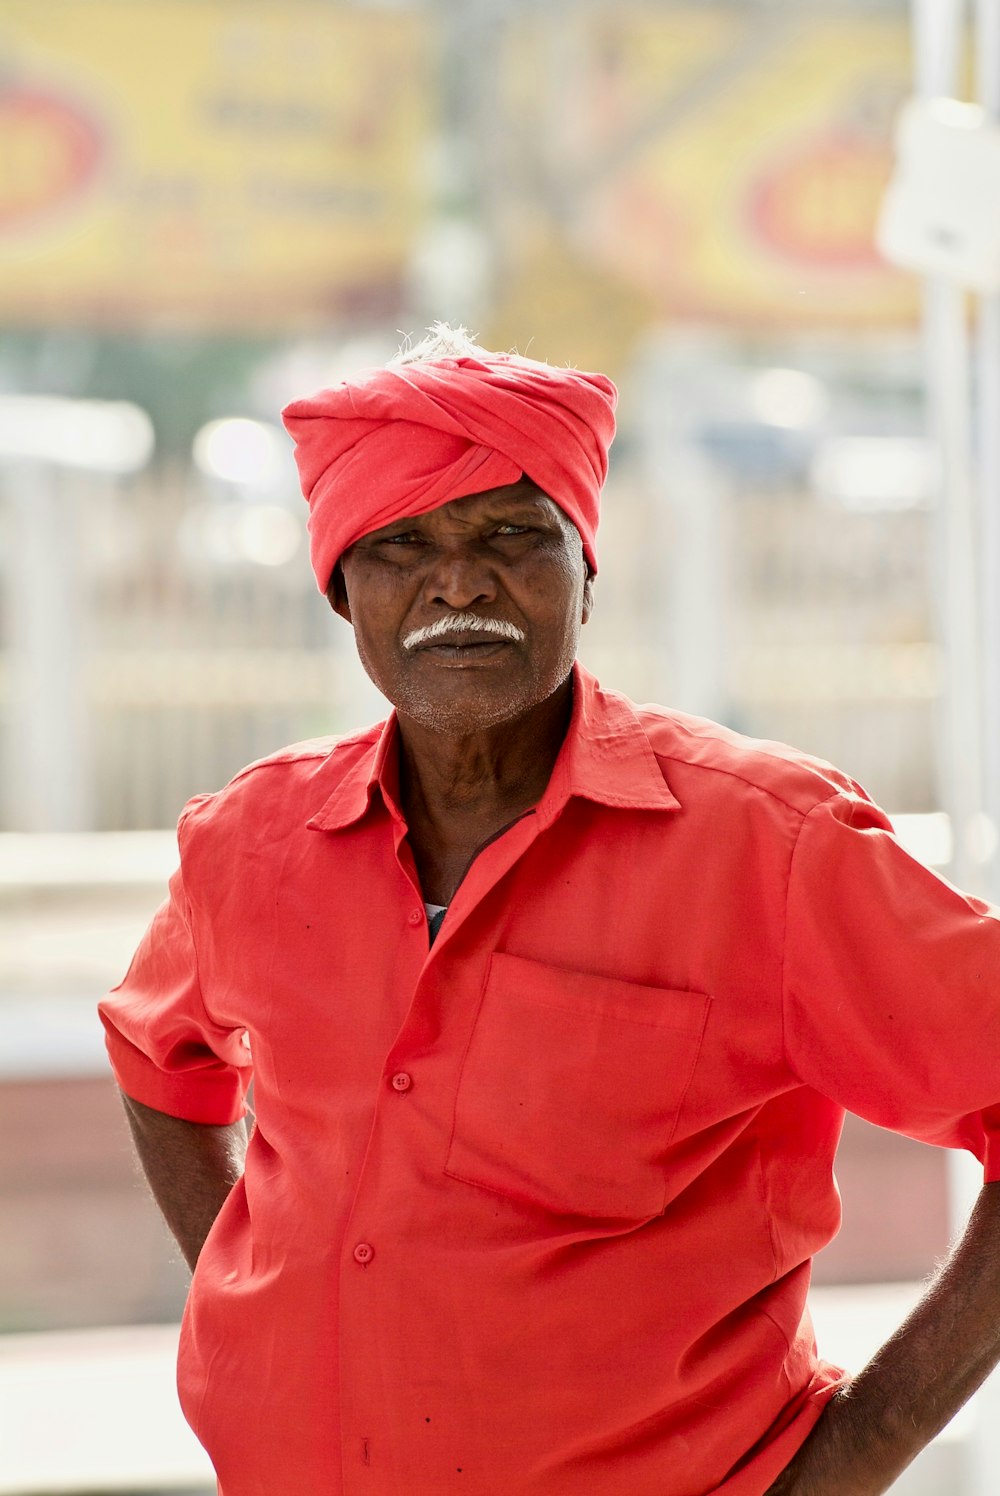 person wearing a red turban during daytime close-up photography